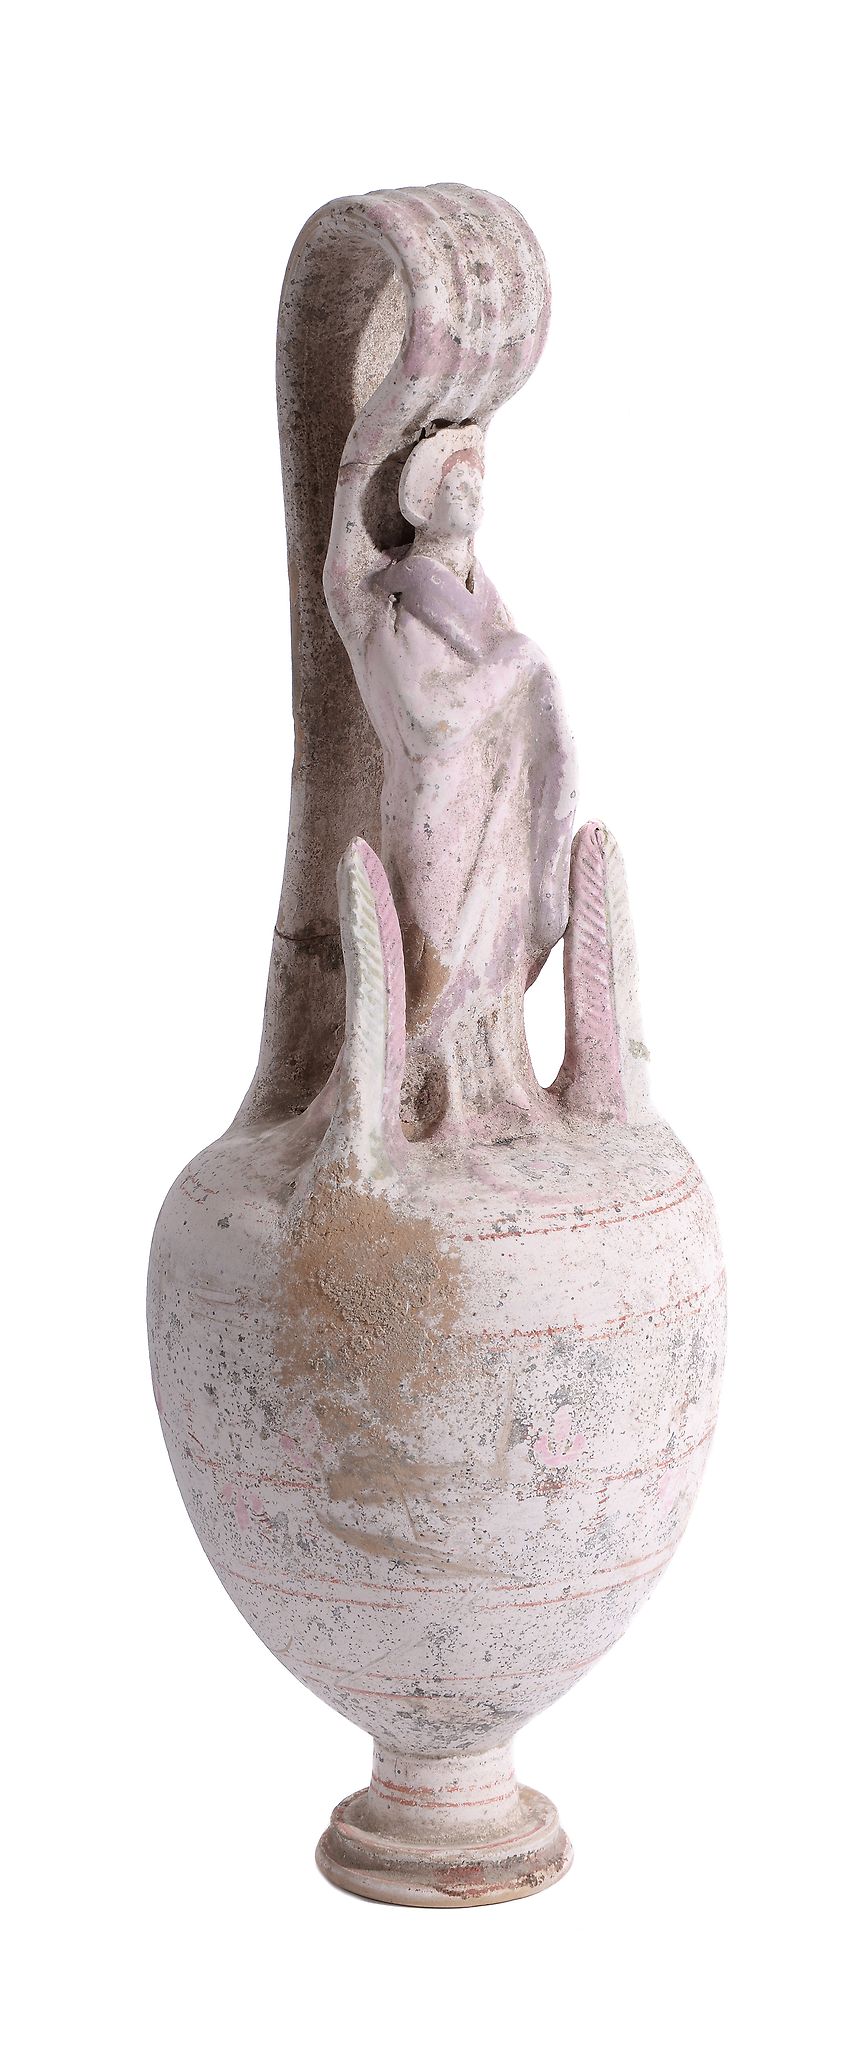 A Canosan pottery false oinochoe, circa 3rd century BC, the ovoid body decorated in pale pink slip